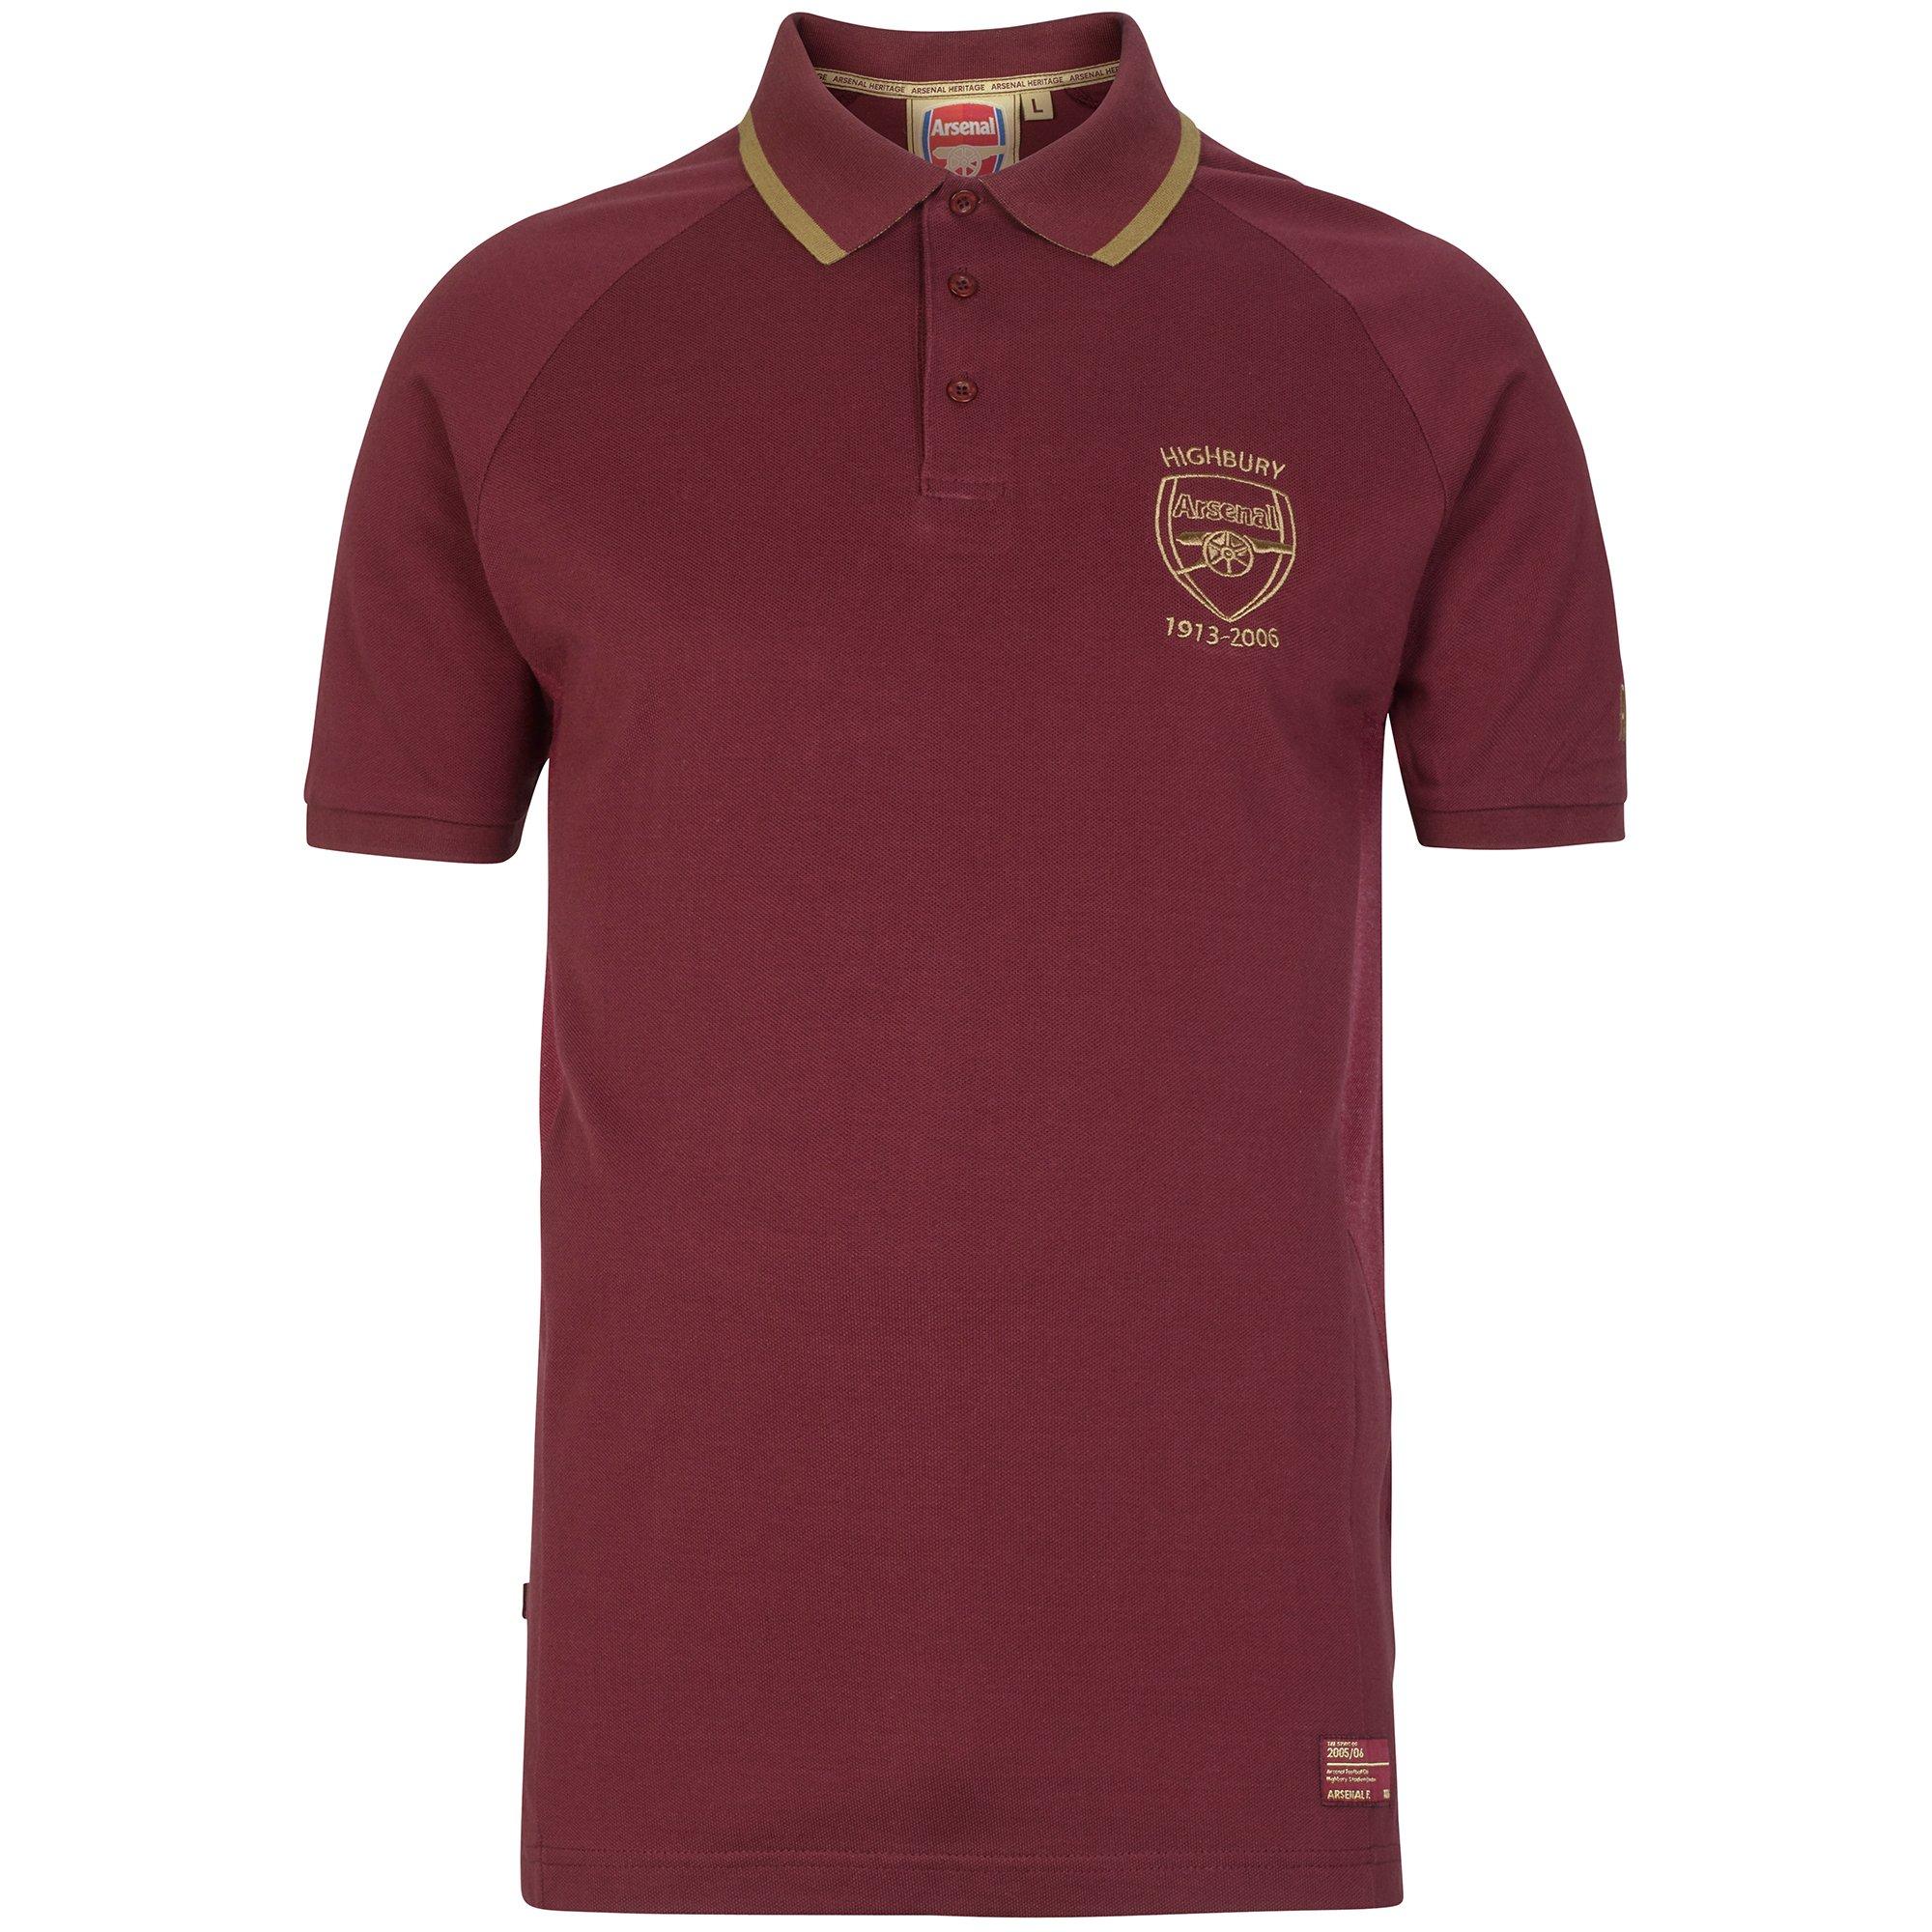 arsenal red currant kit